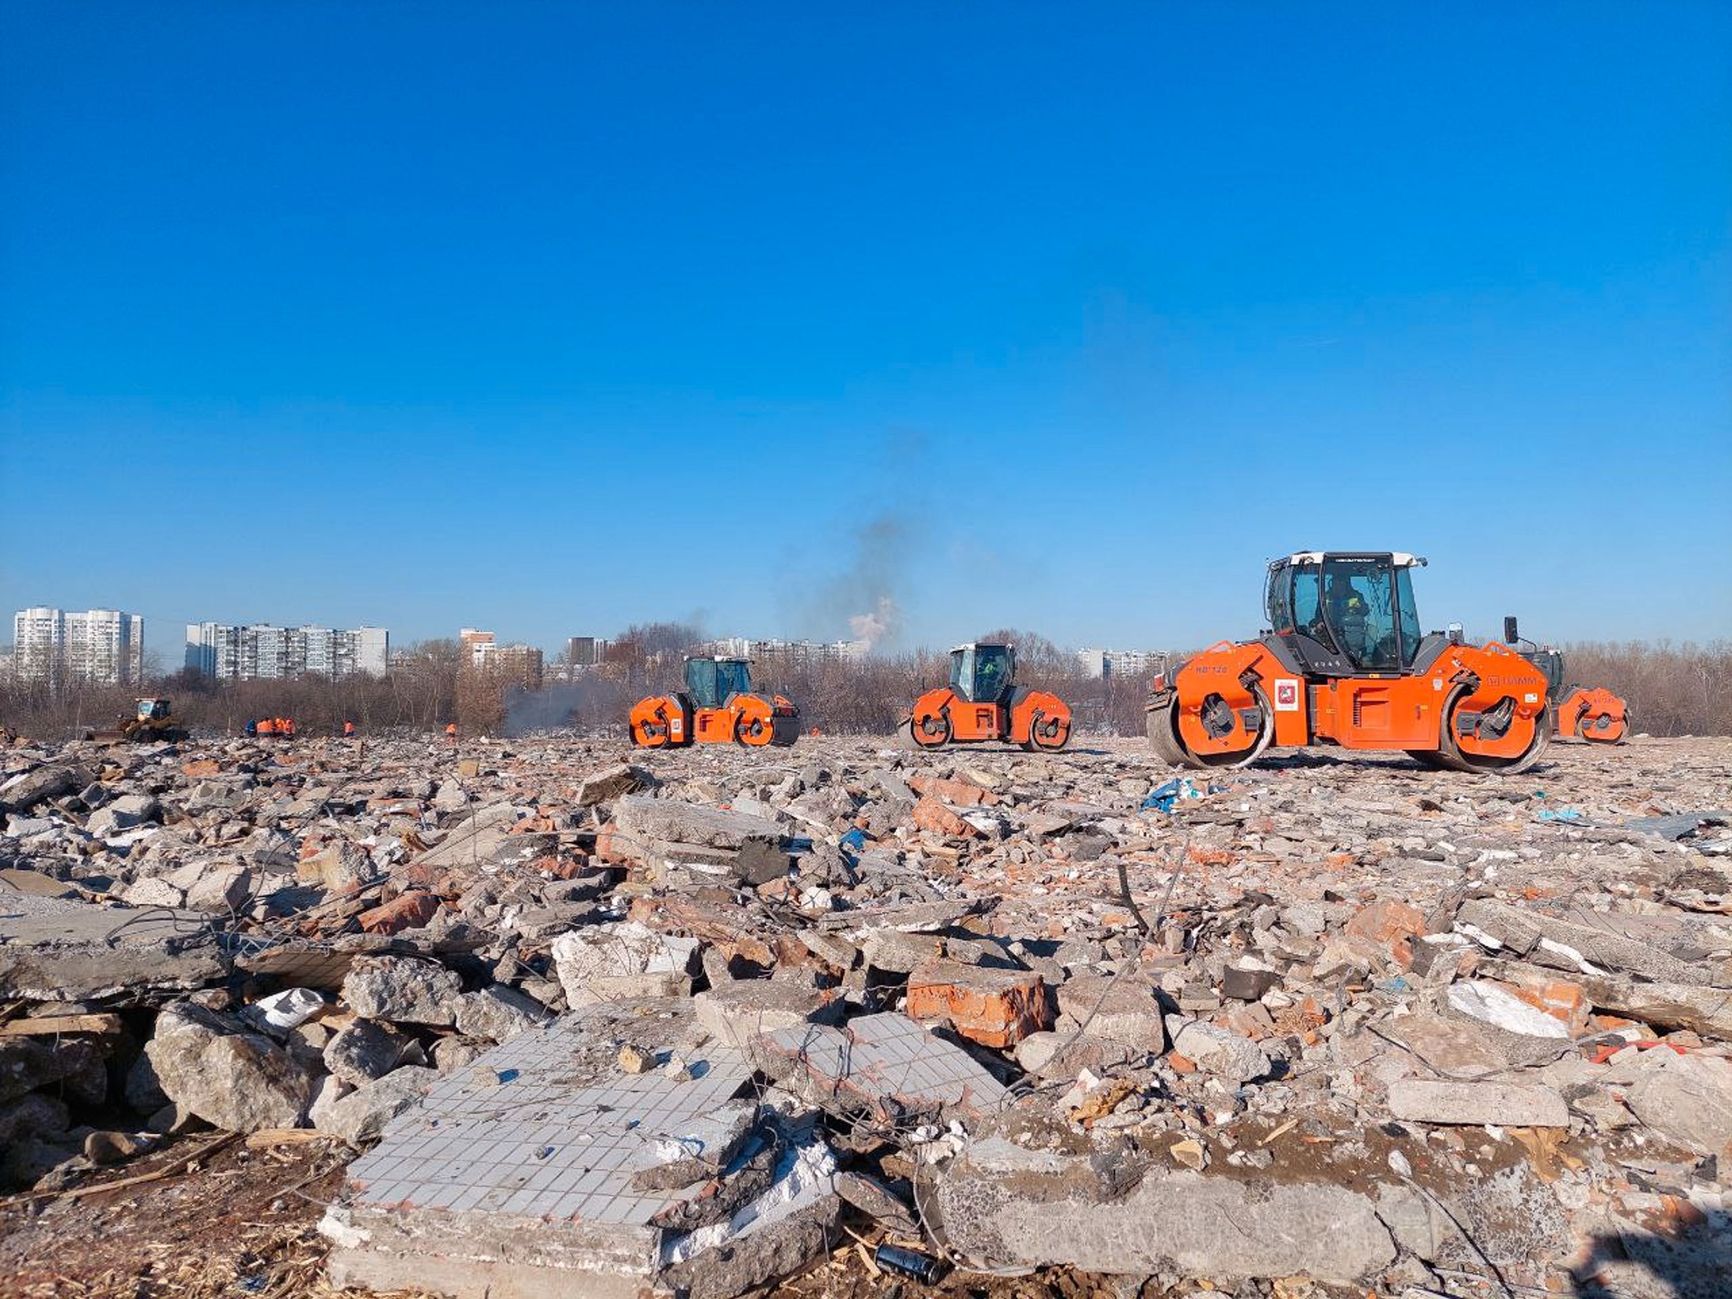 The construction machinery levels the terrain, filling in a layer of construction debris, including large debris from houses demolished under the renovation program